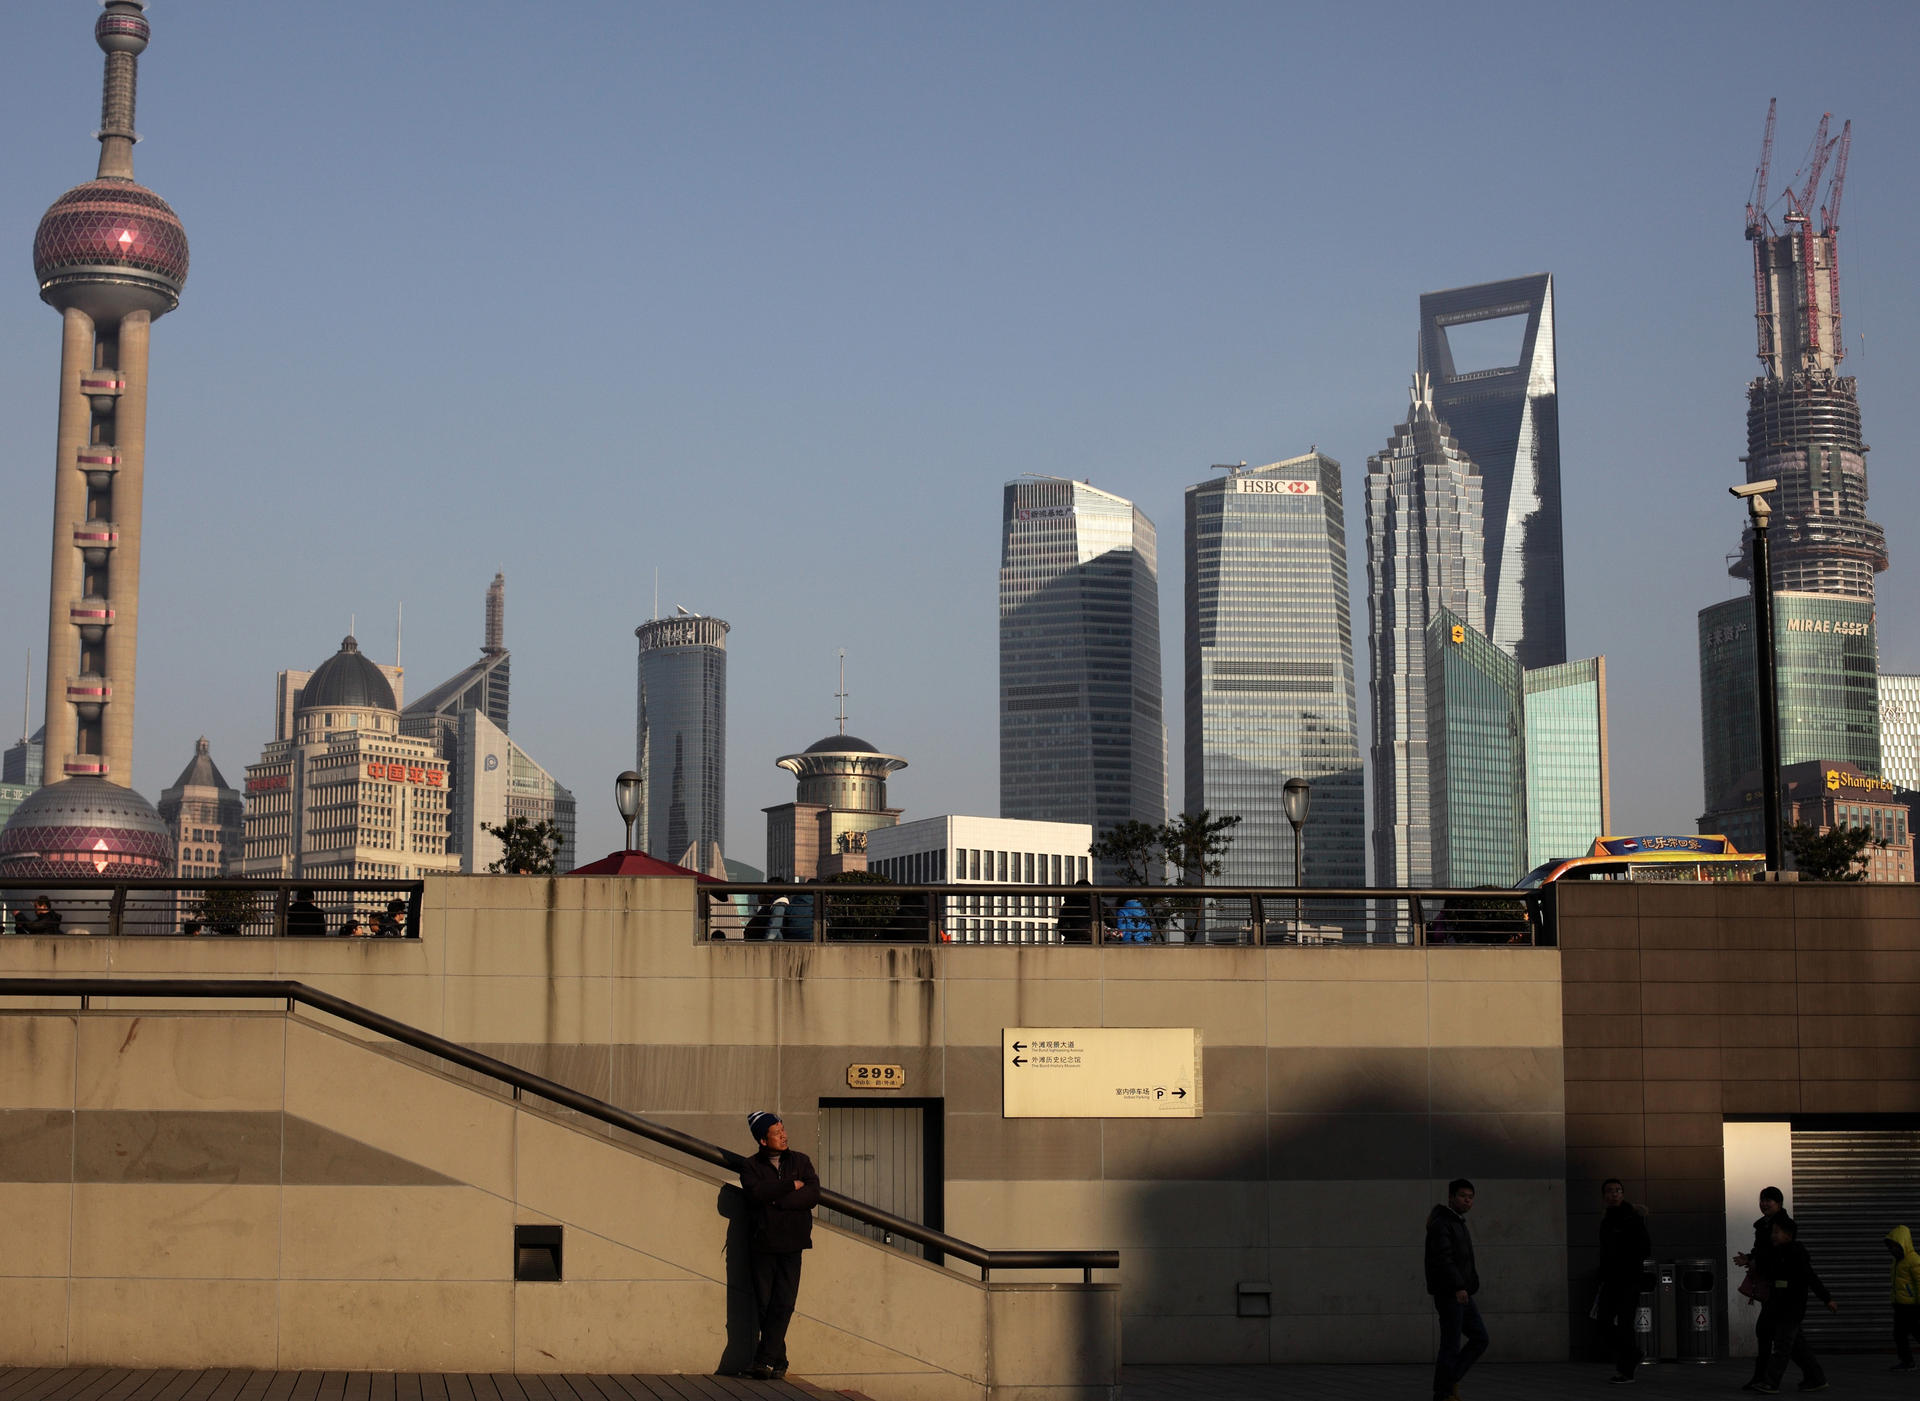 Shanghai is among the Asian cities that promise good returns for office building refurbishment investments. Photo: Bloomberg